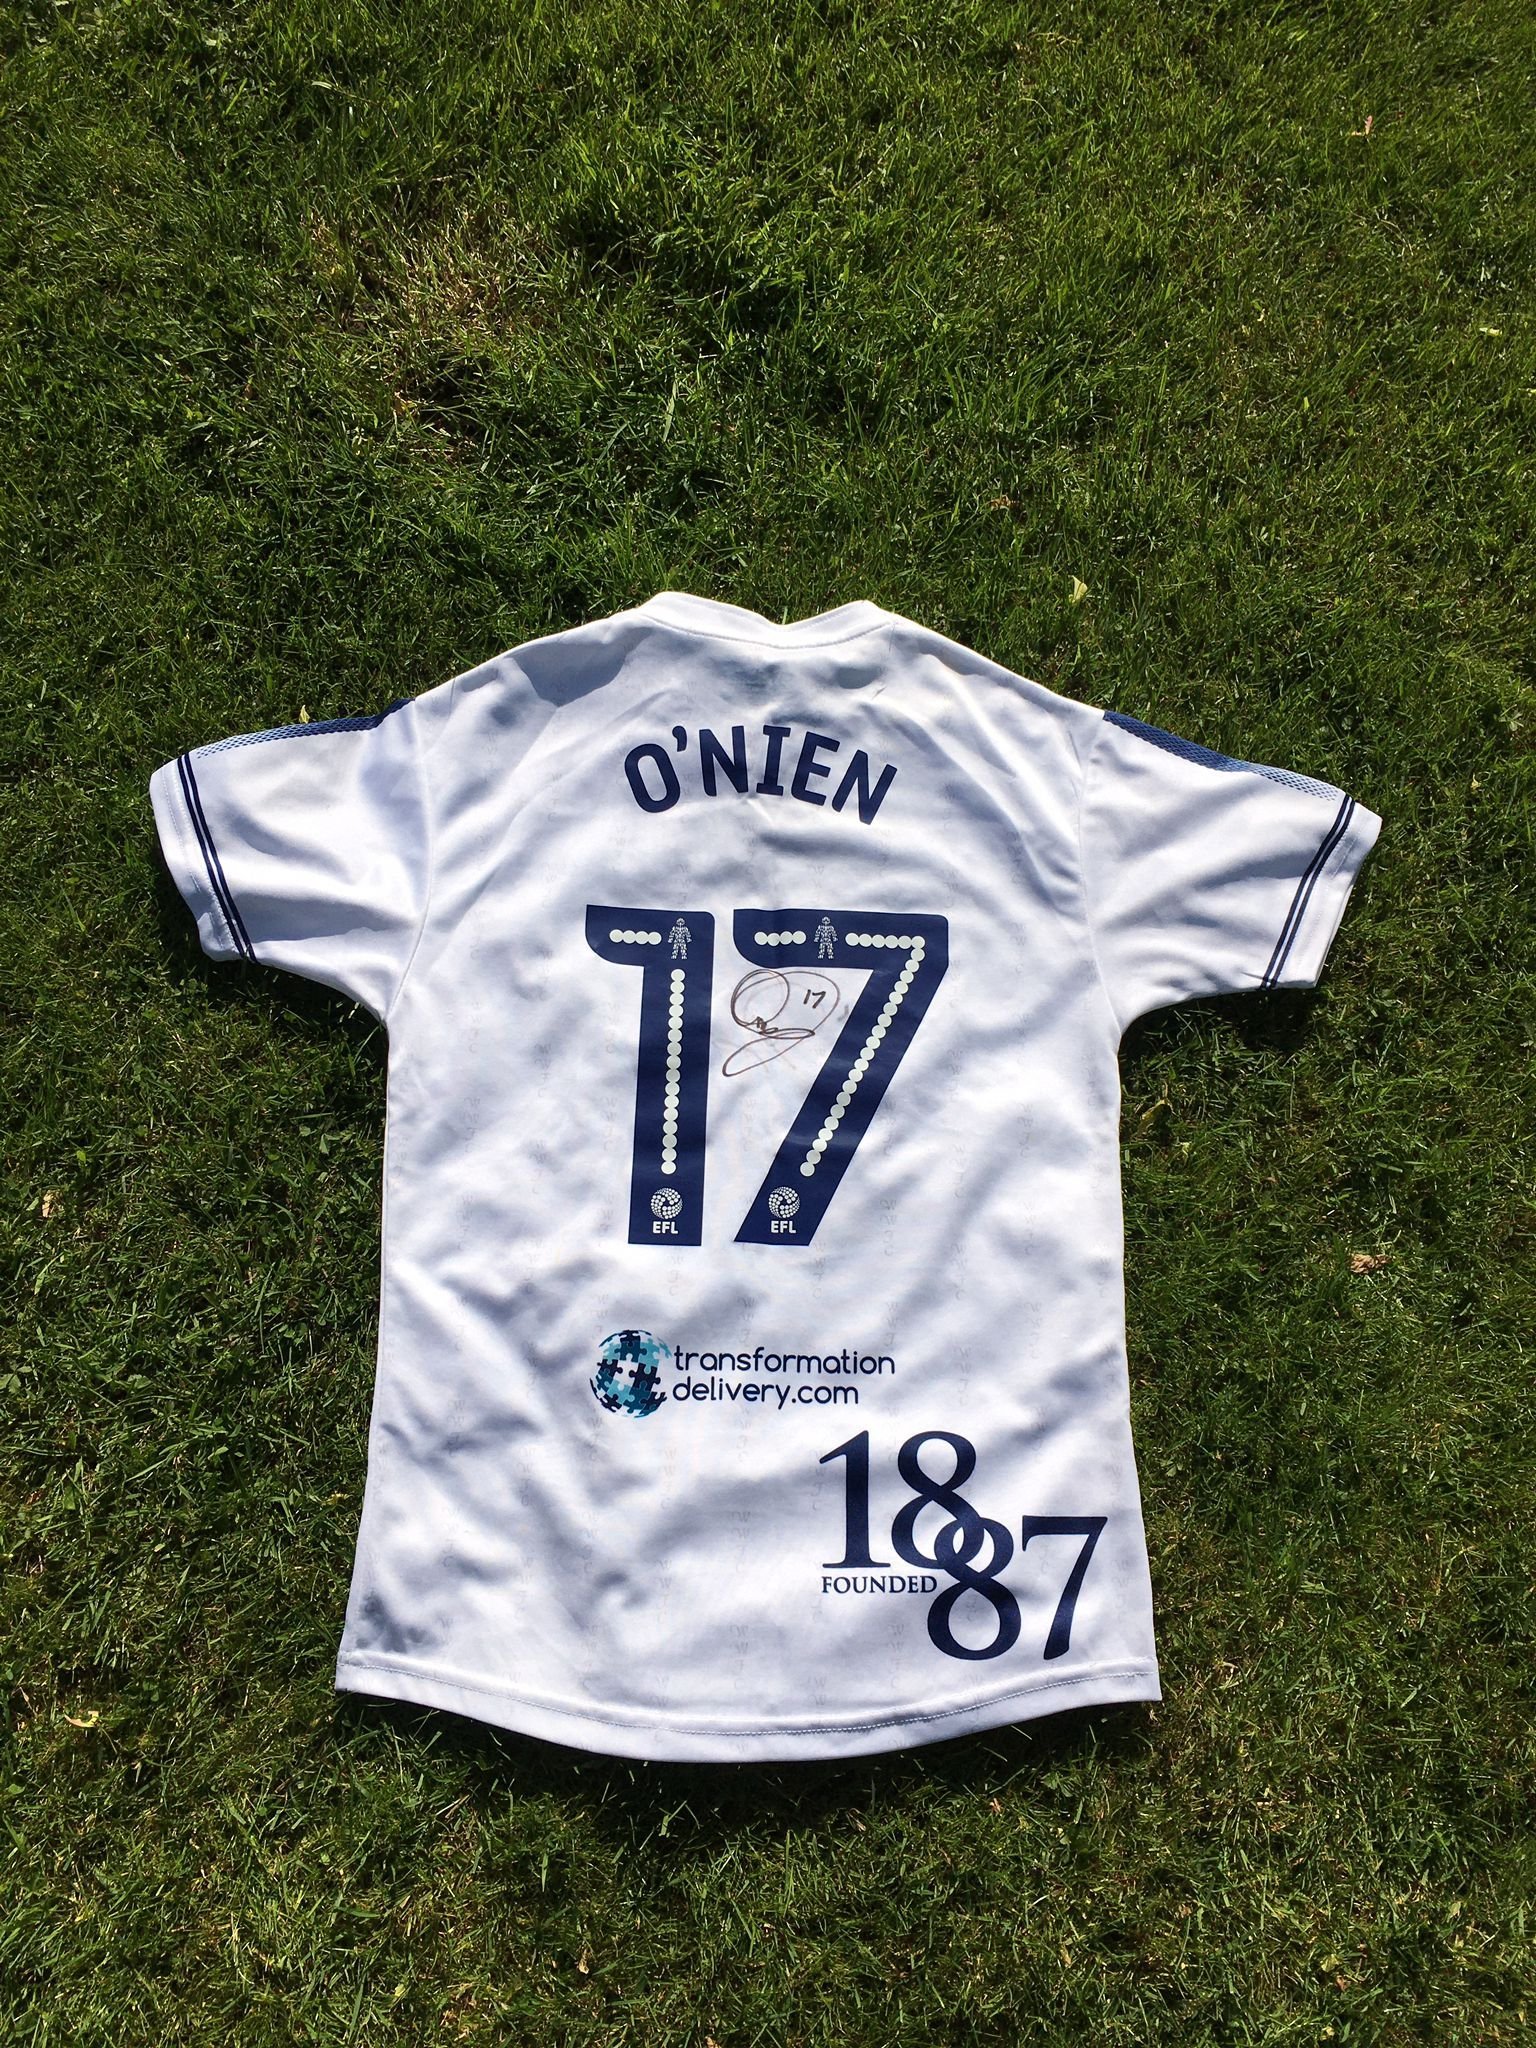 The signed Luke ONien away shirt from the 2016/17 season